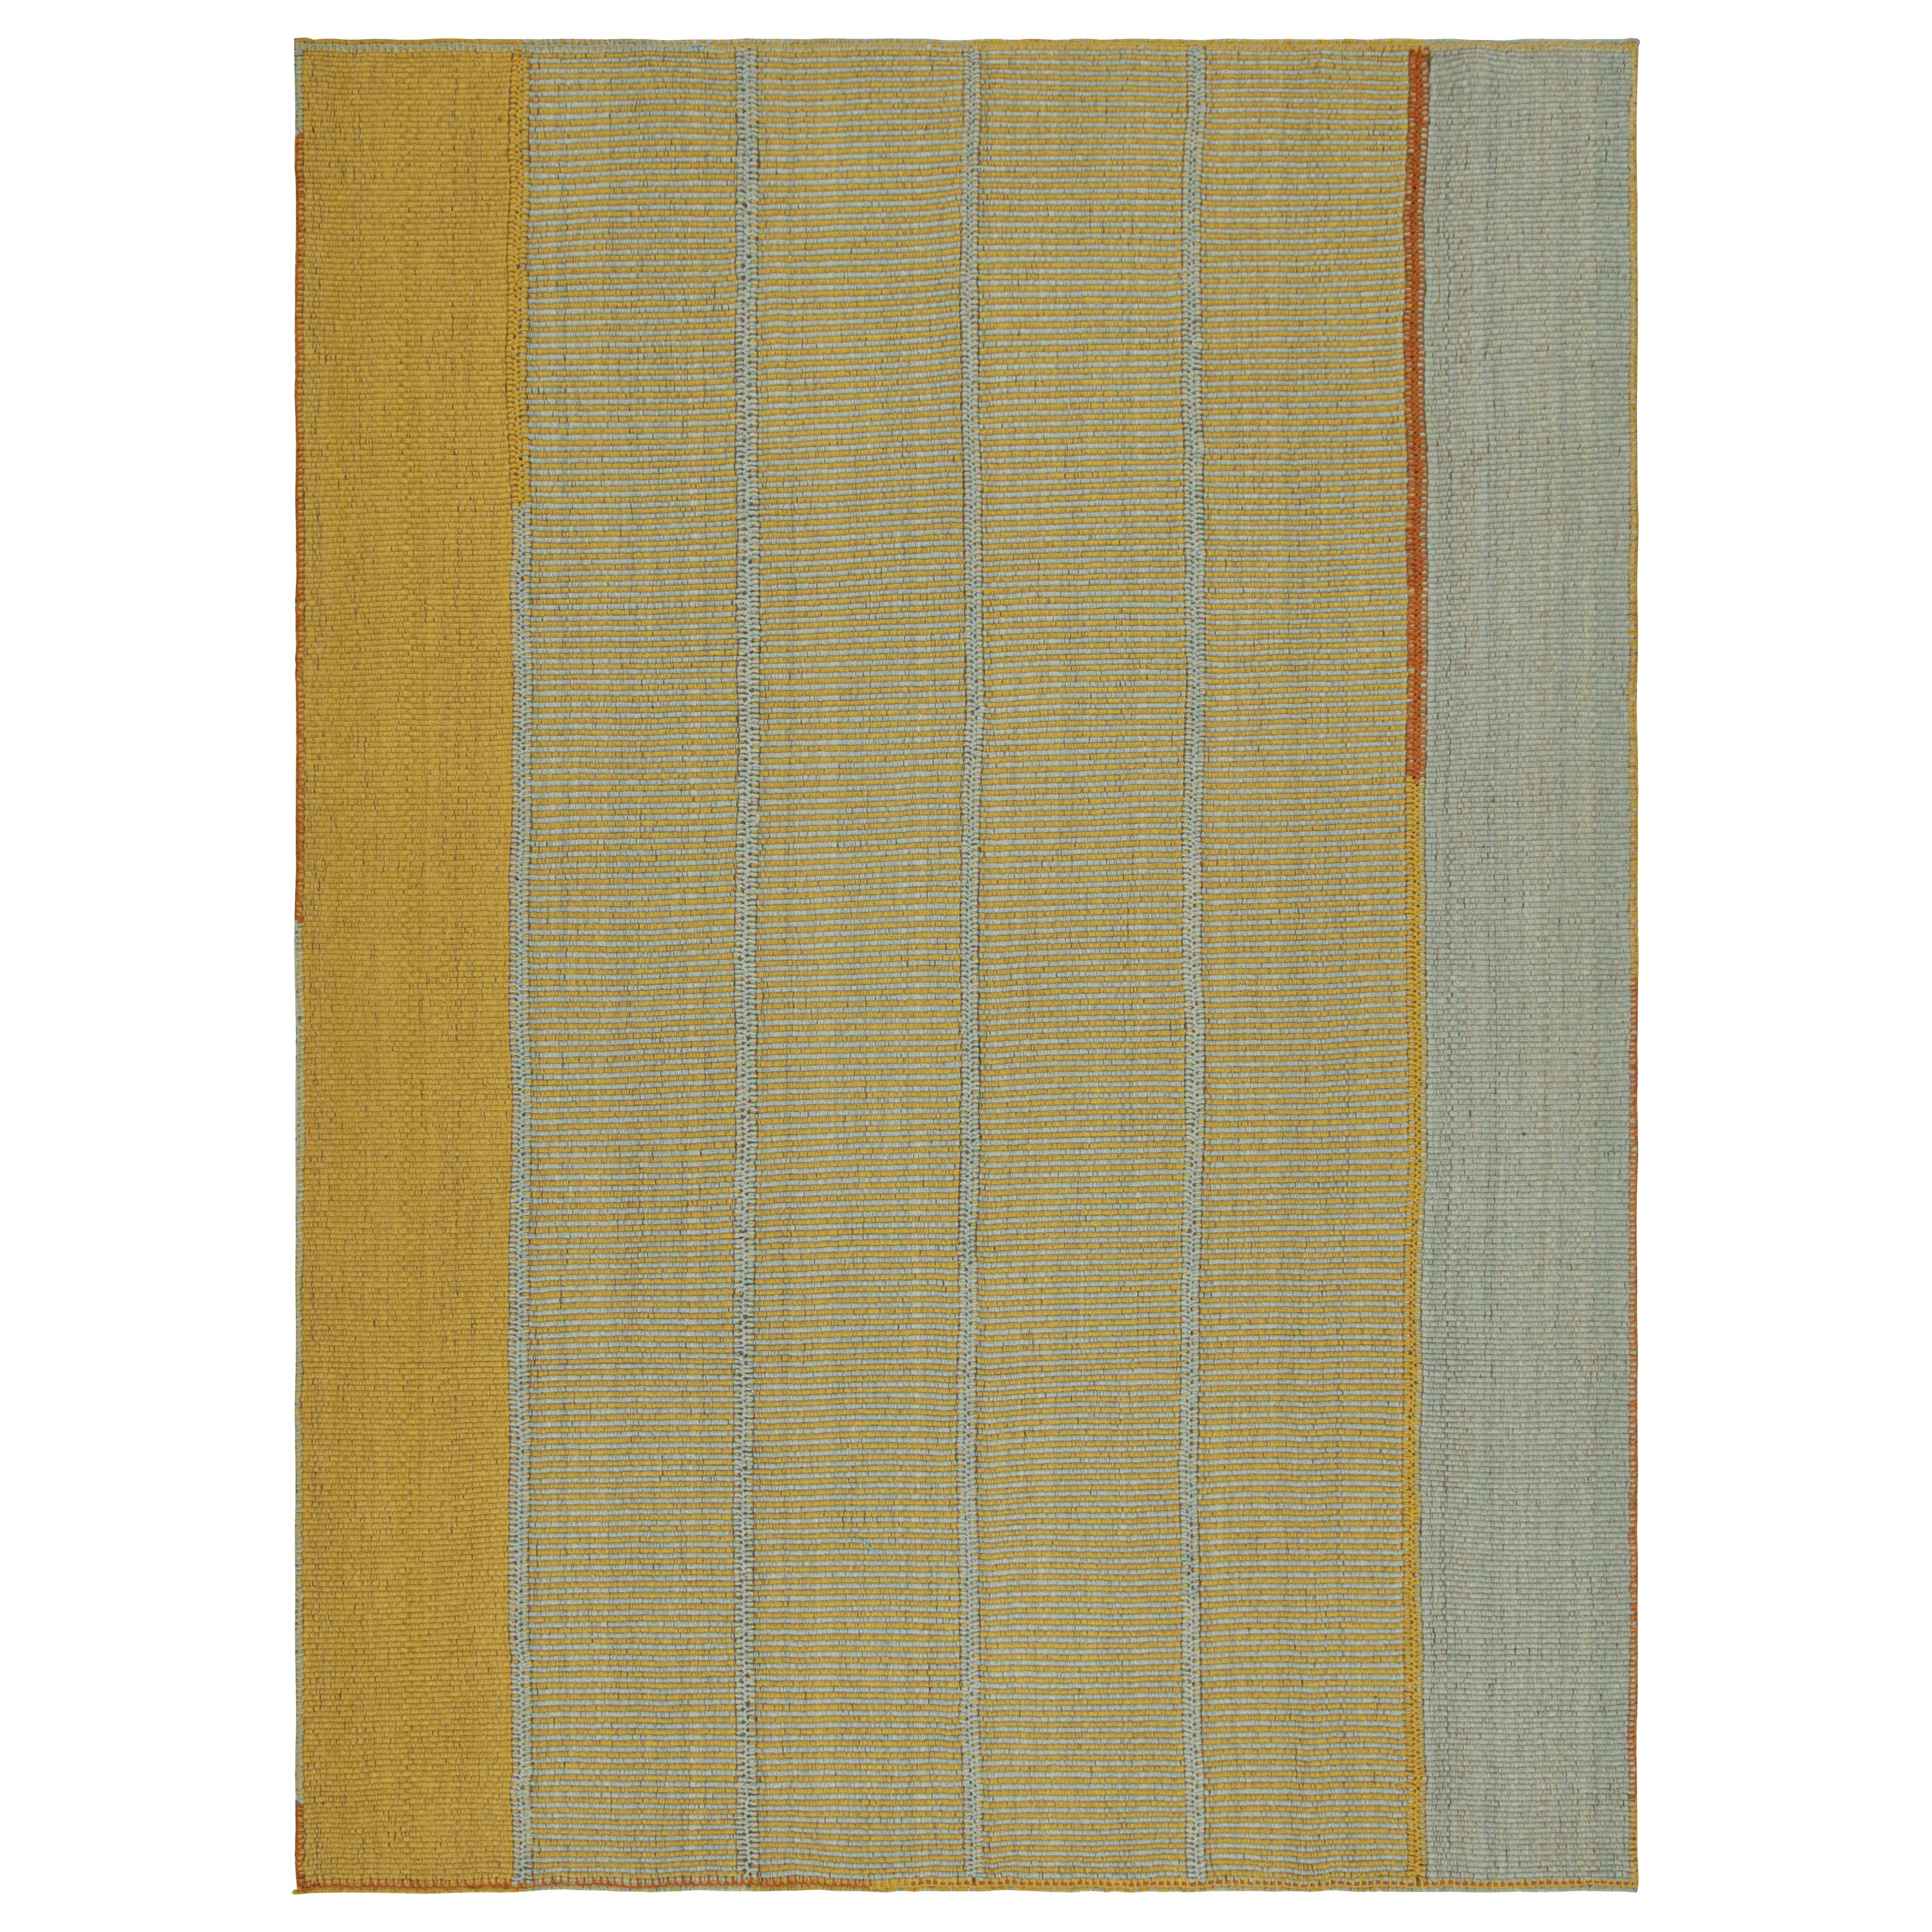 Rug & Kilim’s Contemporary Kilim in Gold and Light Blue Stripes